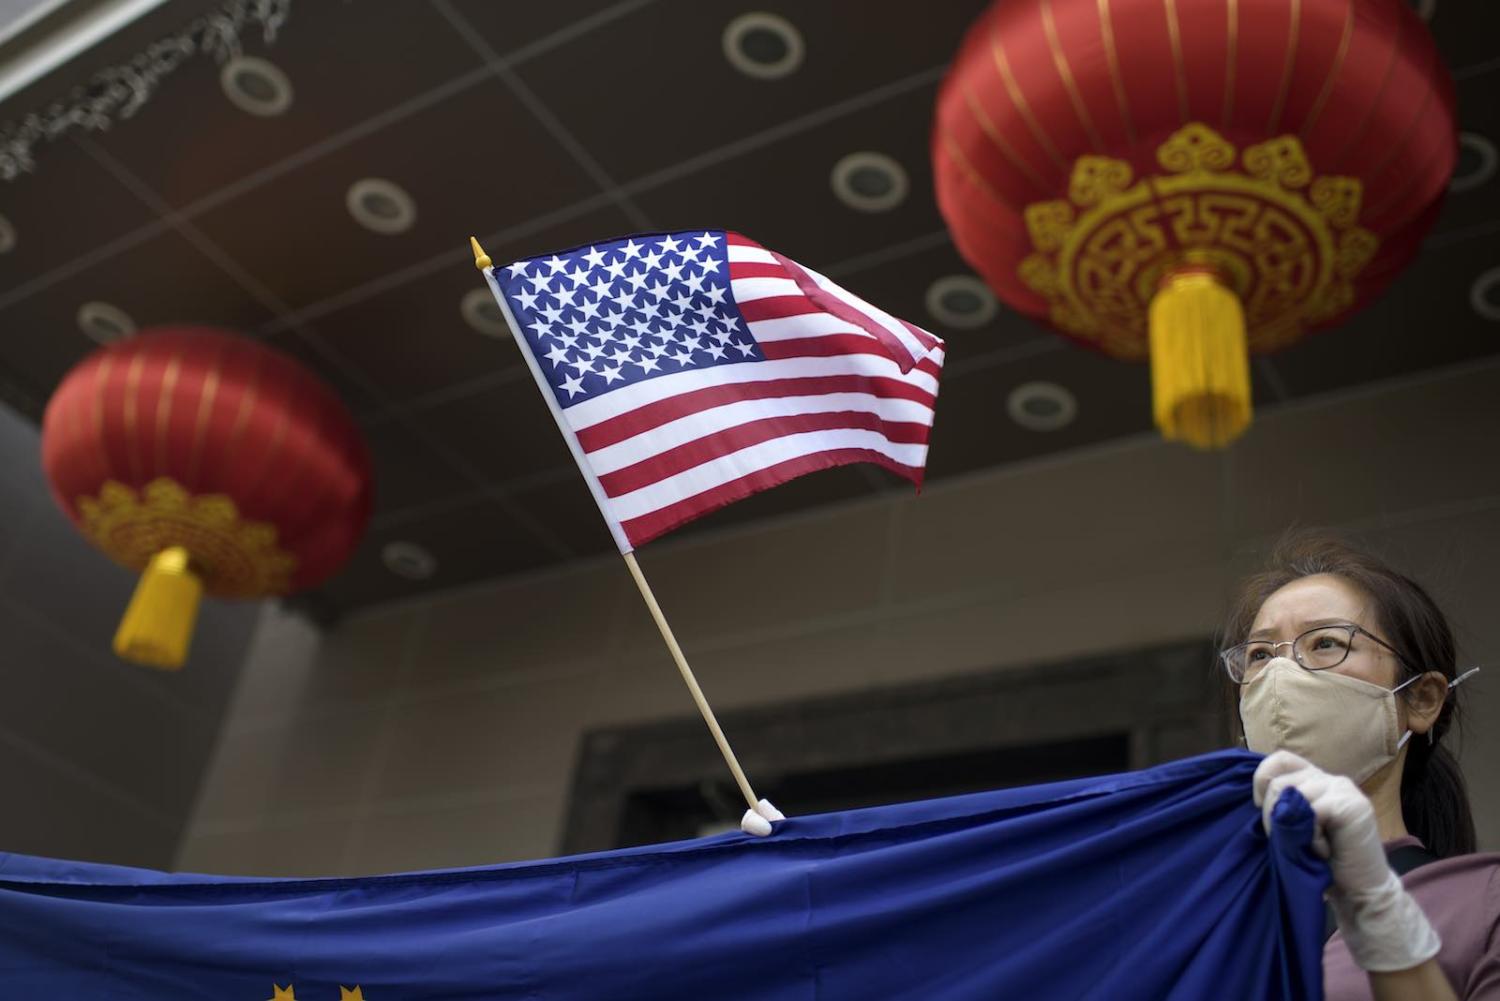 A protester holds a US flag outside of the Chinese consulate in Houston after the Trump administration ordered it be closed (Mark Felix/AFP via Getty Images)